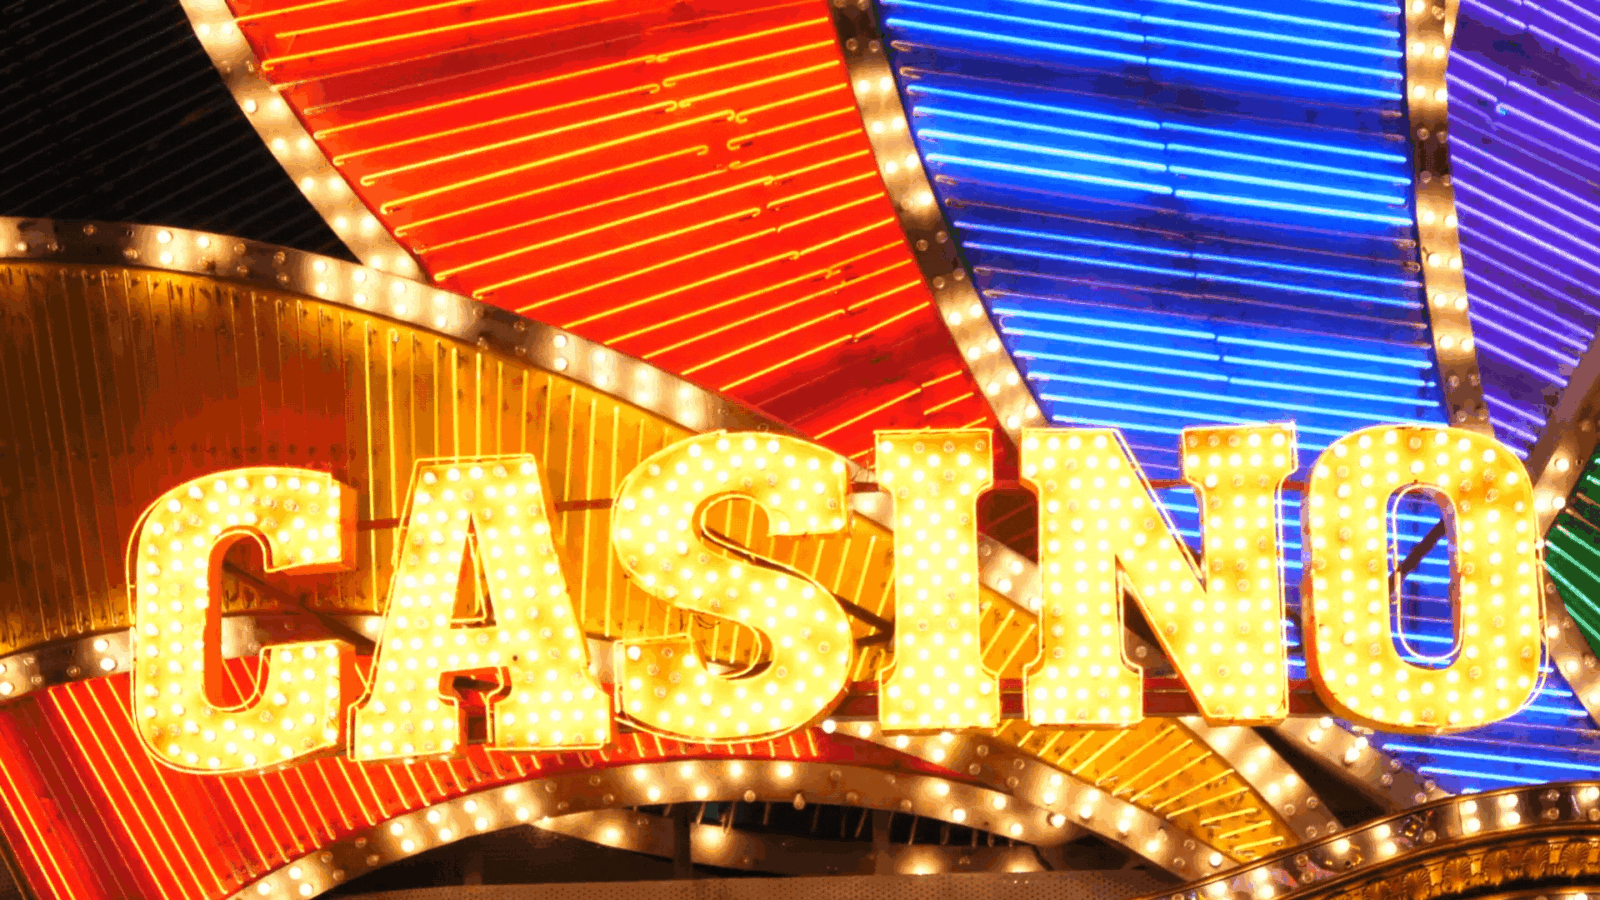 Unbiased Ratings and Online Casino Reviews (Top Rated Casinos)